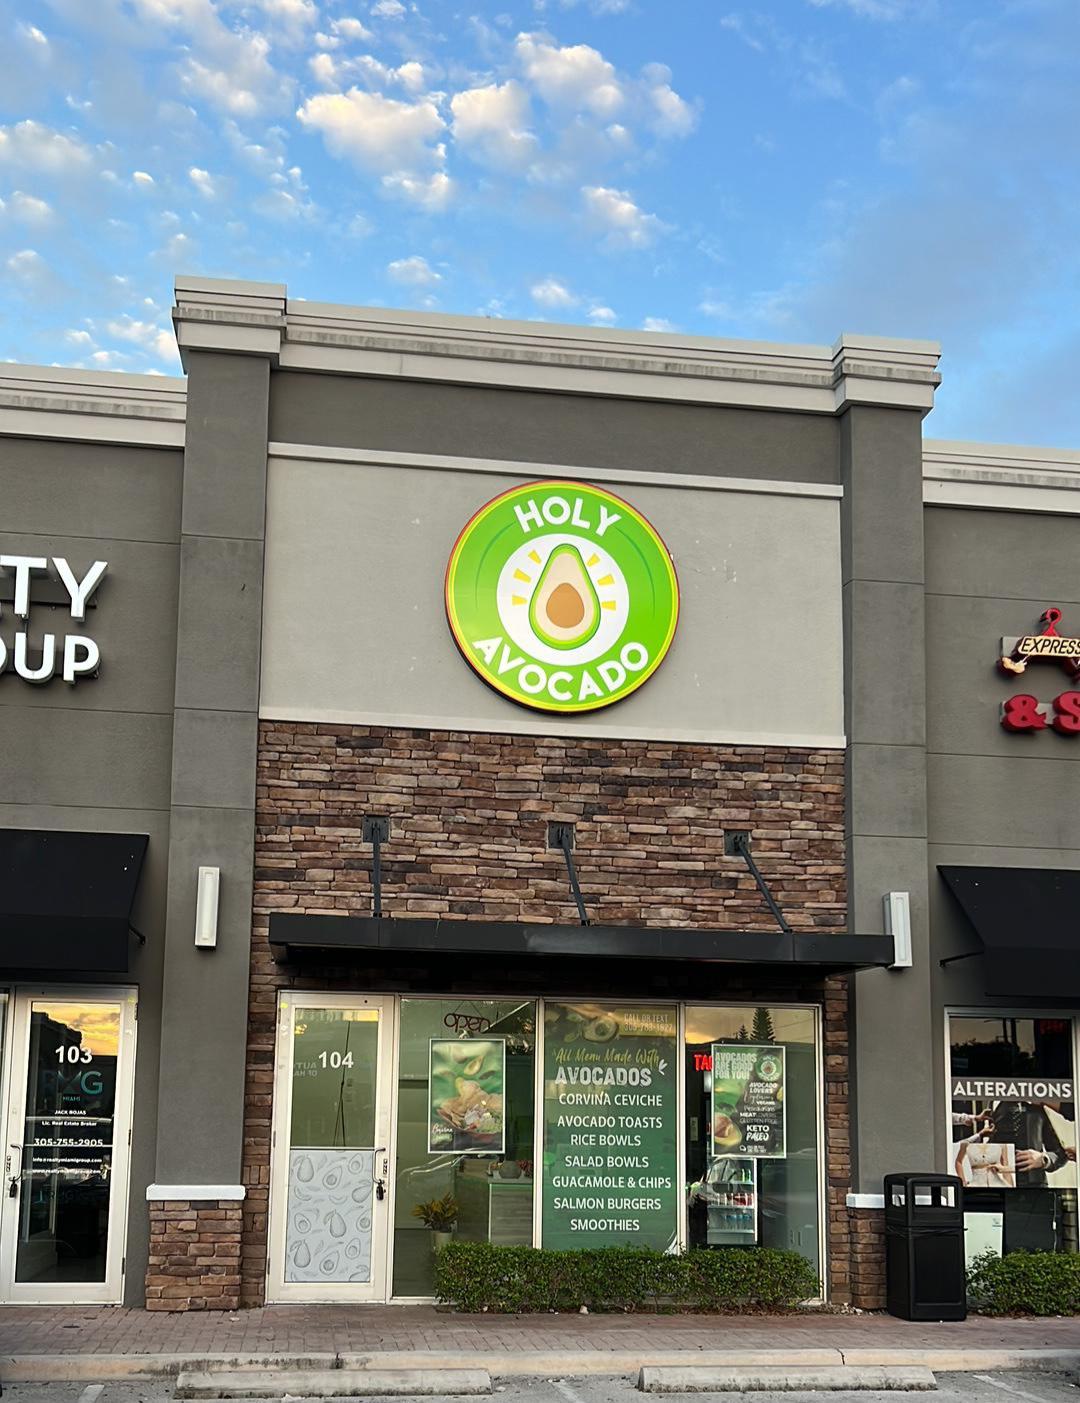 The front of the "Holy Avocado" business in Hallandale Beach, Florida, features a modern and clean design. The facade is gray with a section adorned with bricks in brown and cream tones, giving it an attractive texture and contrast. Centered above the entrance is a large circular sign with the business's logo: the name "Holy Avocado" in white letters on a green background, with an image of an avocado at the center, emphasizing the restaurant's theme.

There are two large windows allowing a peek inside, over which there are vinyl decals showcasing the products they offer, such as "Avocado Toasts," "Rice Bowls," "Salad Bowls," "Guacamole & Chips," "Salmon Burgers," and "Smoothies." The "Corvina Ceviche" is also highlighted, suggesting the freshness of the ingredients used. The unit number is 104, and right next to it, at 103, there appears to be another business named "QUALITY CUP," though it is not the focus of the image.

The sidewalk in front of the business is clear with several parking spaces available. The lighting appears to be ample, with at least one light fixture visible above the door, likely providing excellent visibility during nighttime hours. The clear sky with scattered clouds suggests the photo was taken on a clear day. Overall, the establishment conveys a sense of being a clean and welcoming place that specializes in healthy dishes with avocado as a key ingredient.